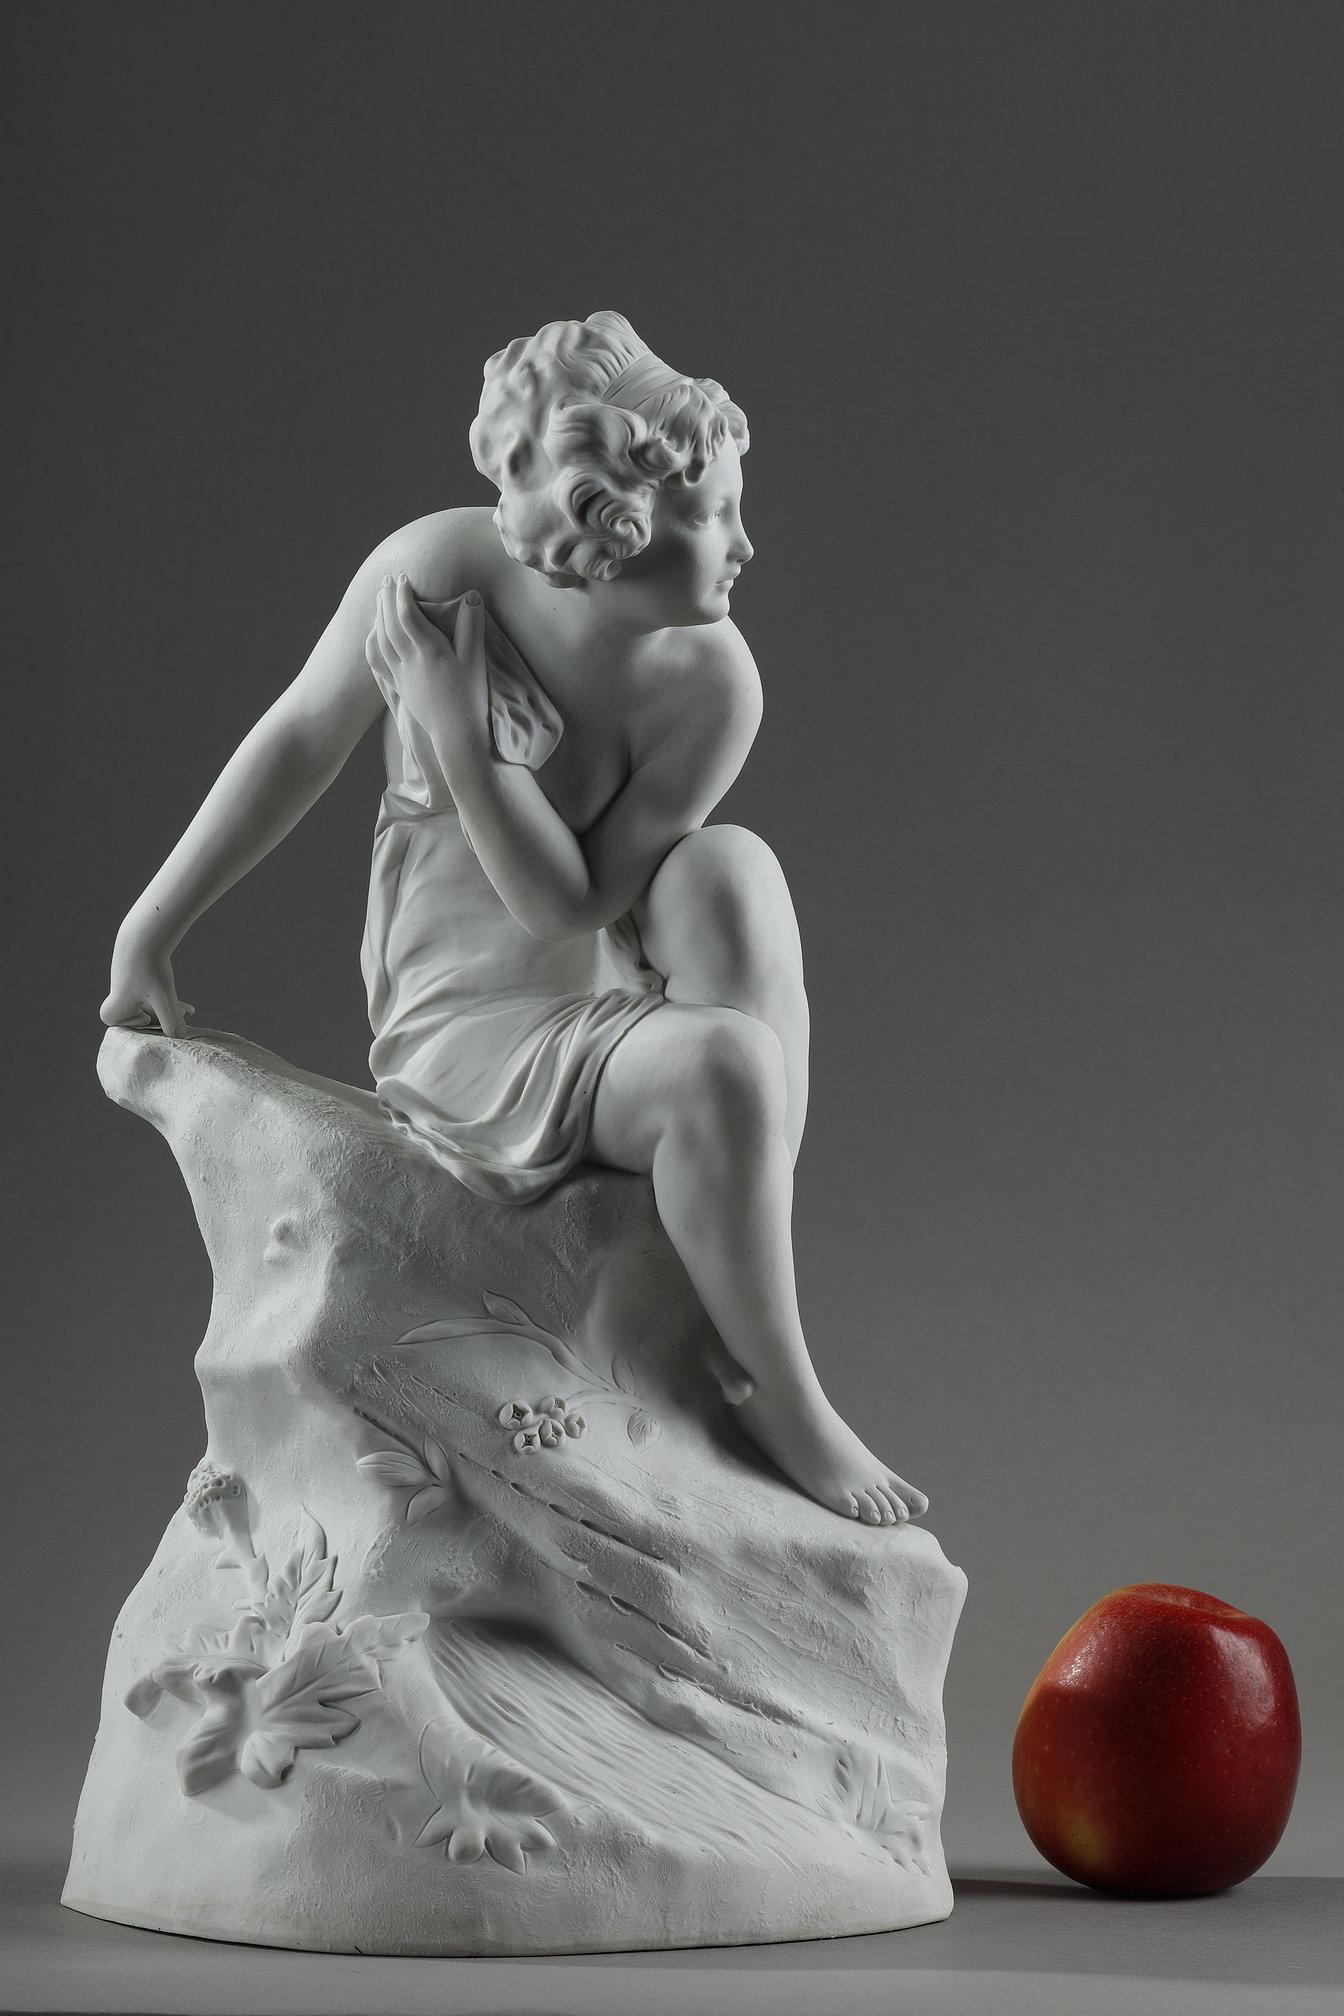 Statuette in biscuit porcelain representing a nude woman seated on a rock after the Italian sculptor Raphaël Nannini. Engraved on the back: 